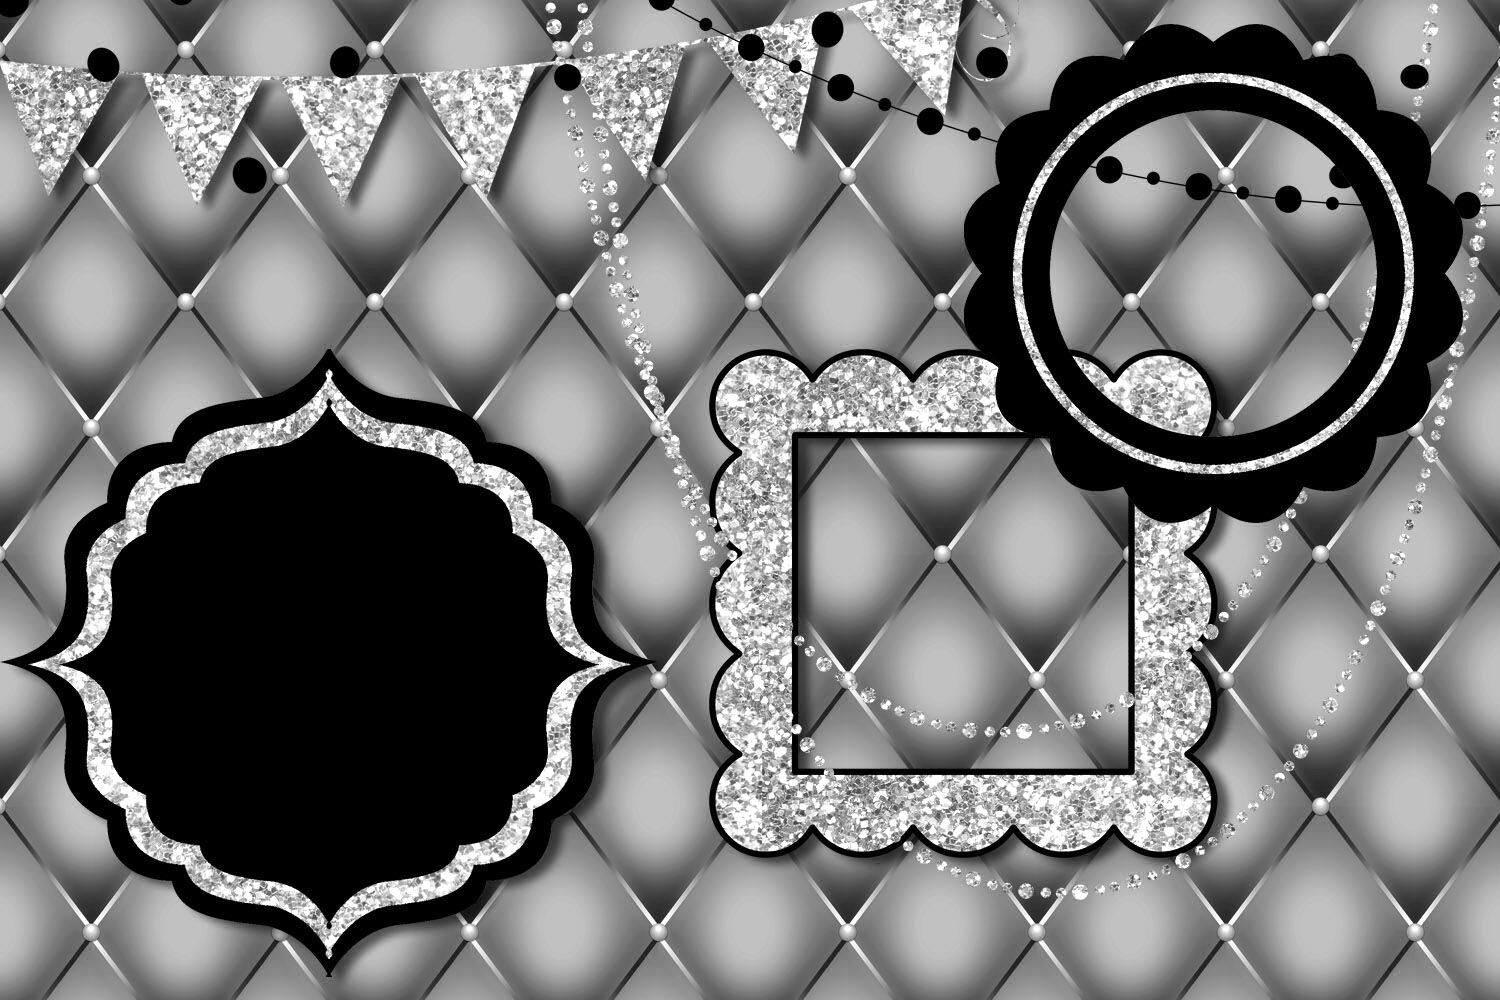 Black and Silver Party Decorations Clipart Graphic by Digital